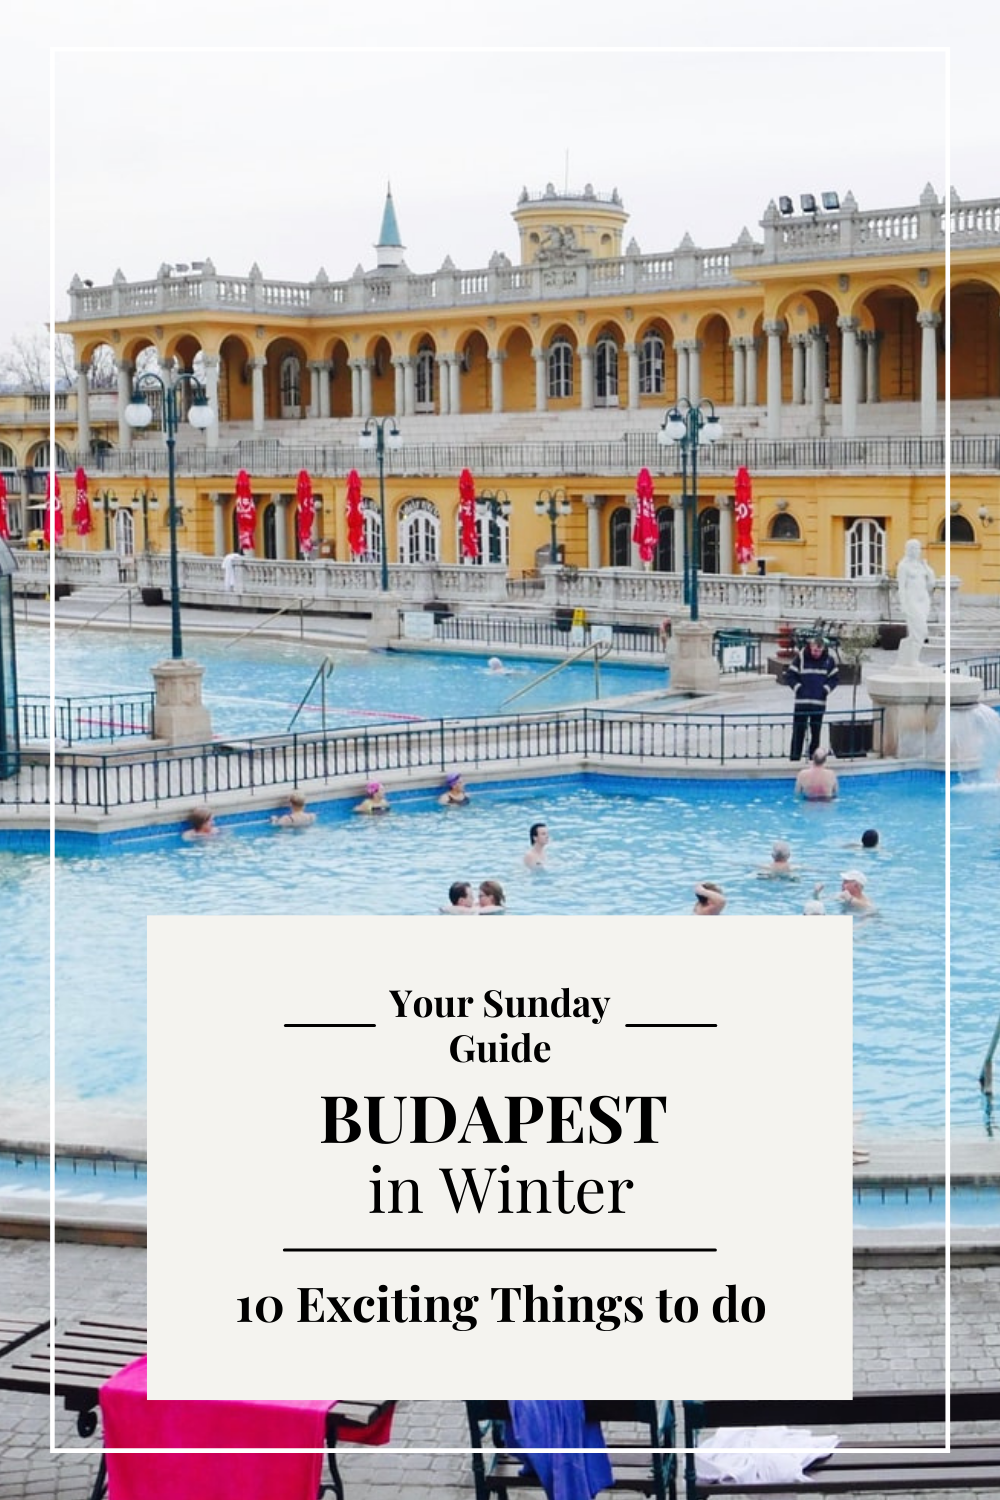 10 exciting things to do in Budapest in winter